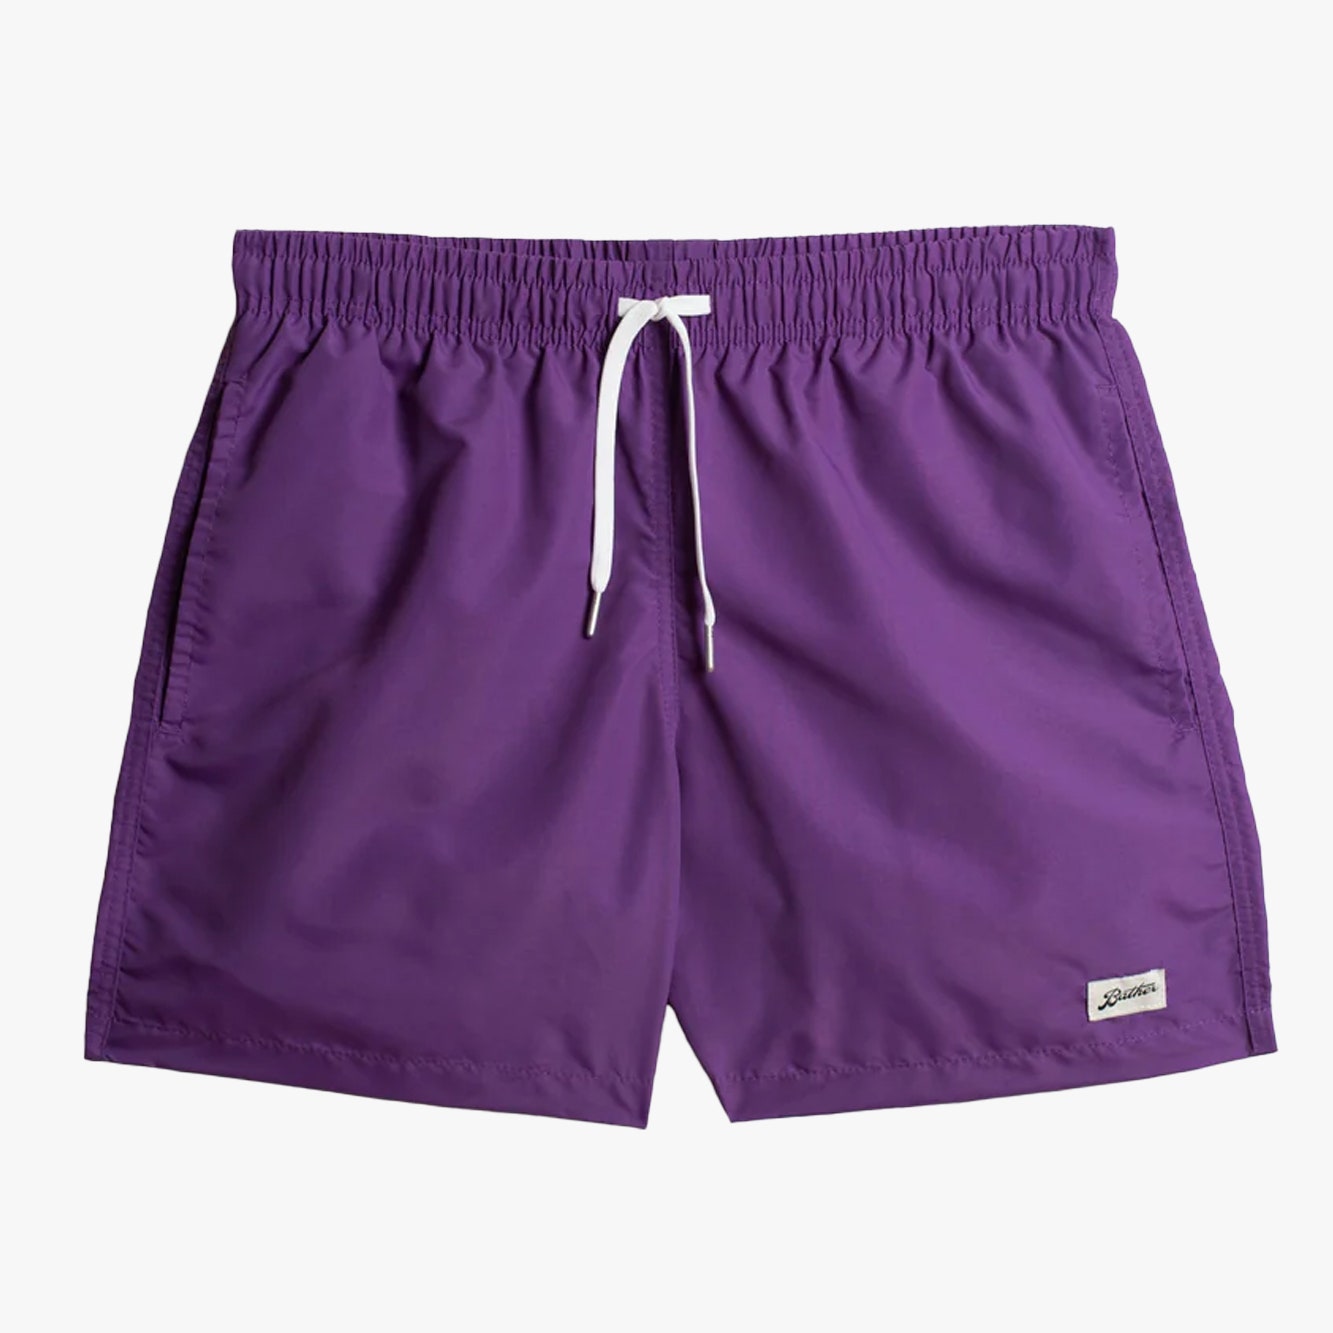 The Best Men's Shorts on Sale Right Now